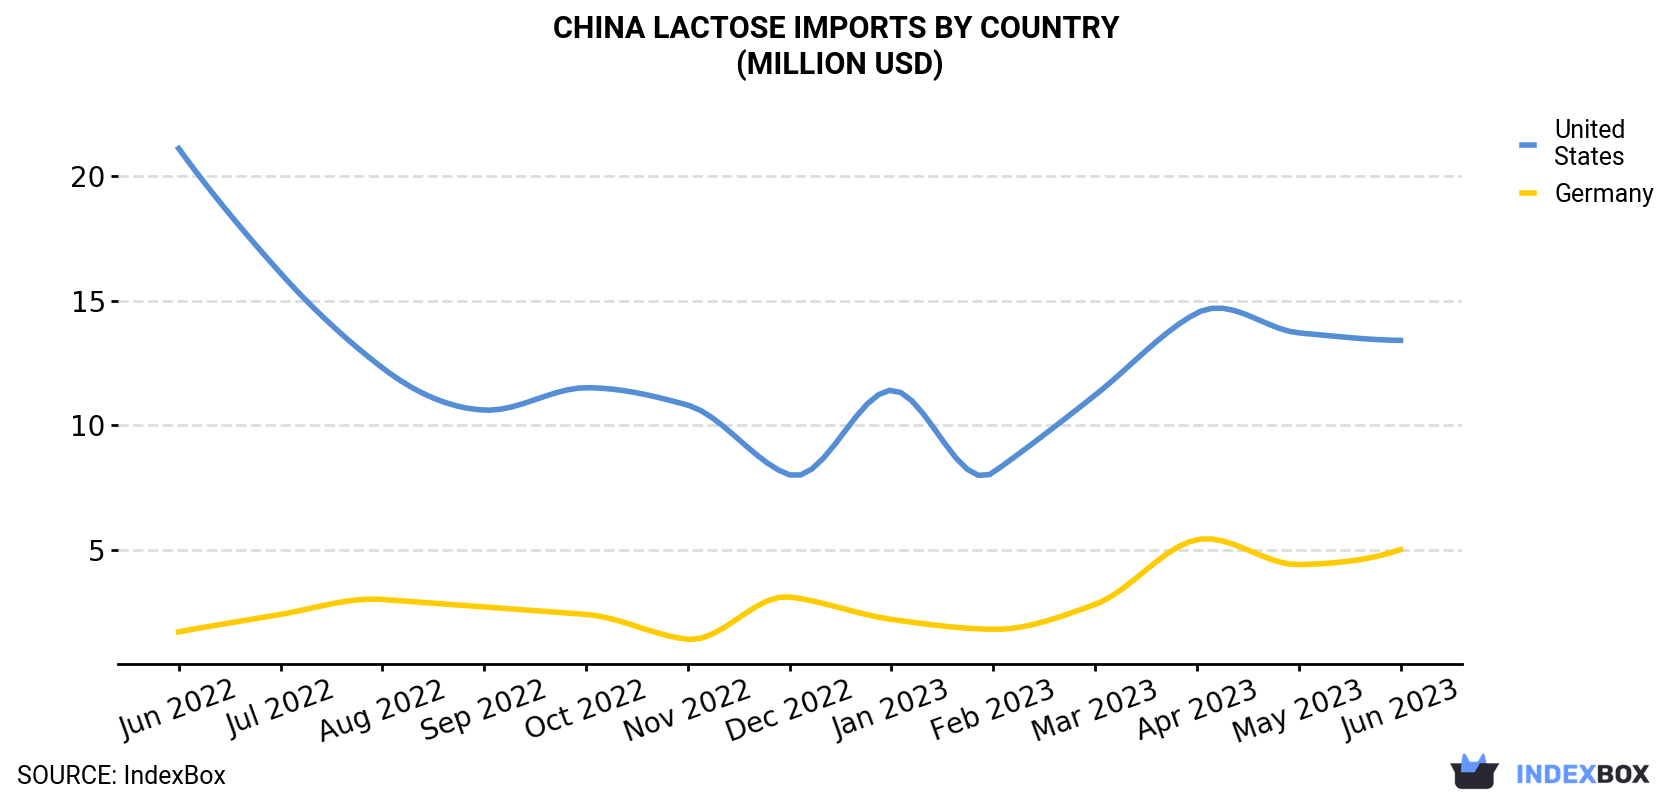 China Lactose Imports By Country (Million USD)